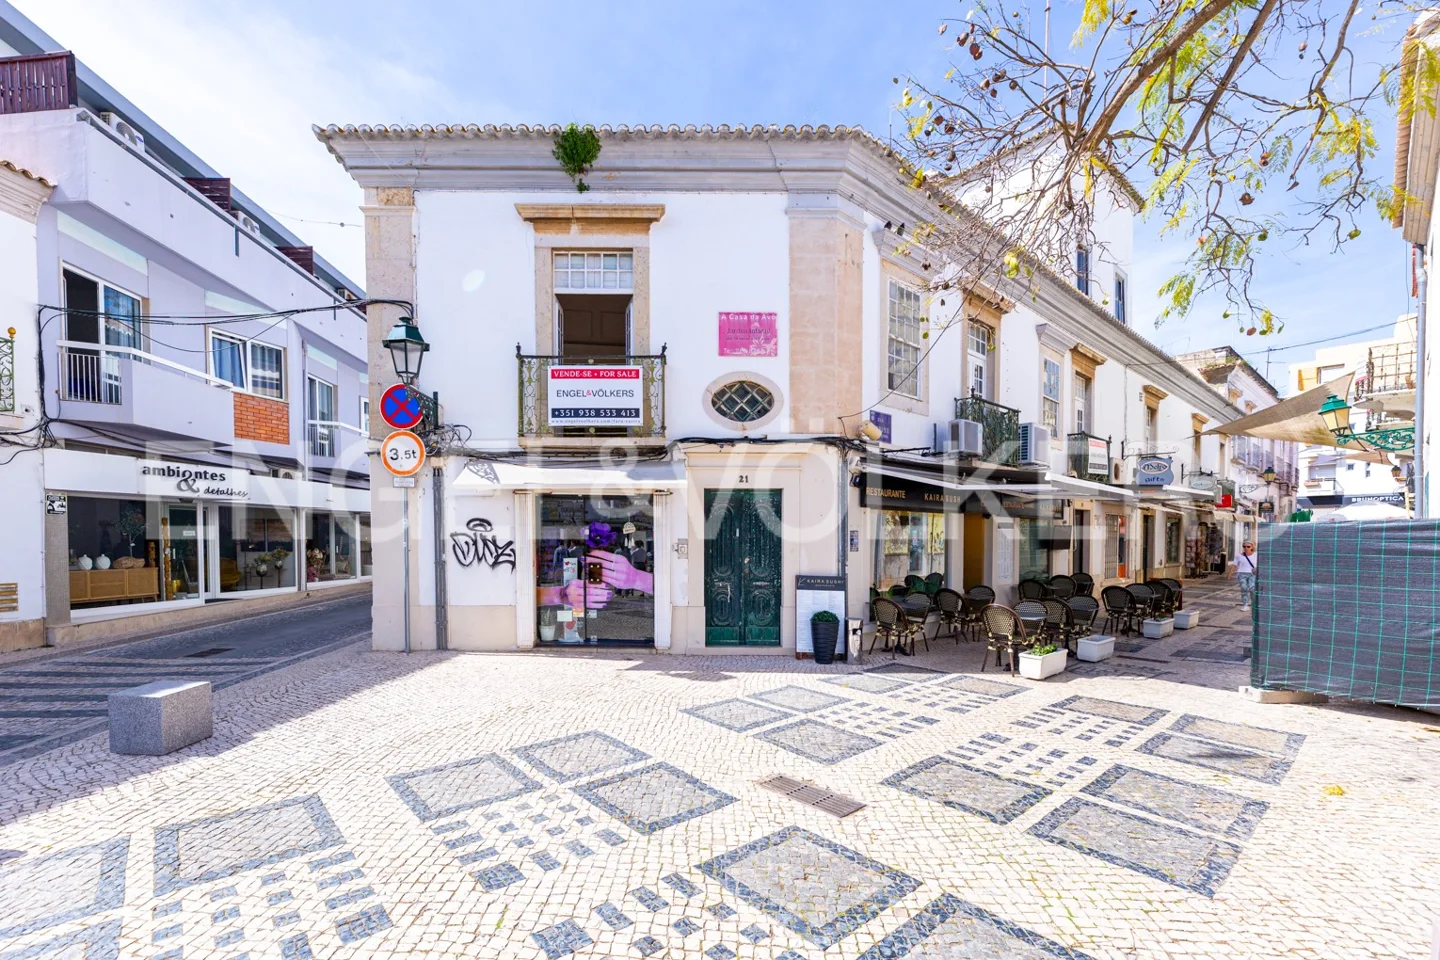 535 sqm - Investment opportunity in Faro Downtown